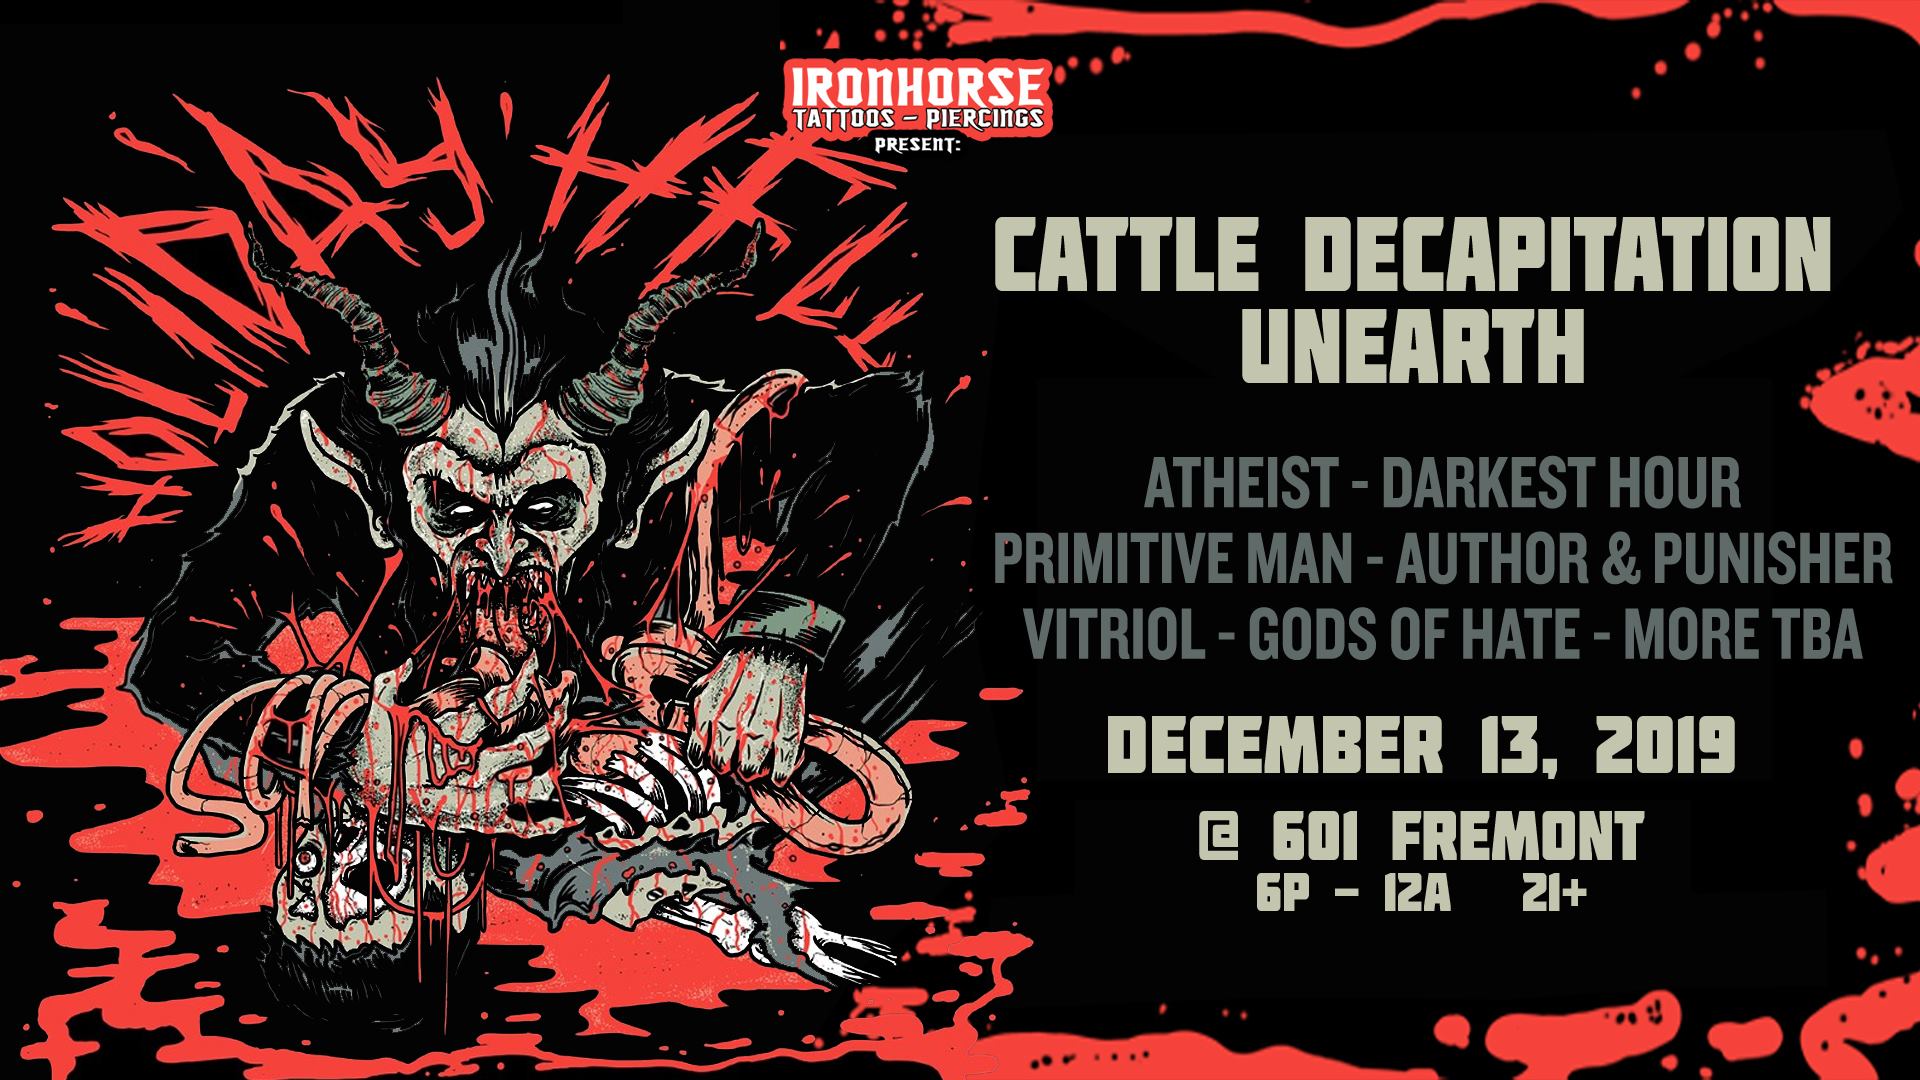 Holiday Hellfest In Downtown Las Vegas